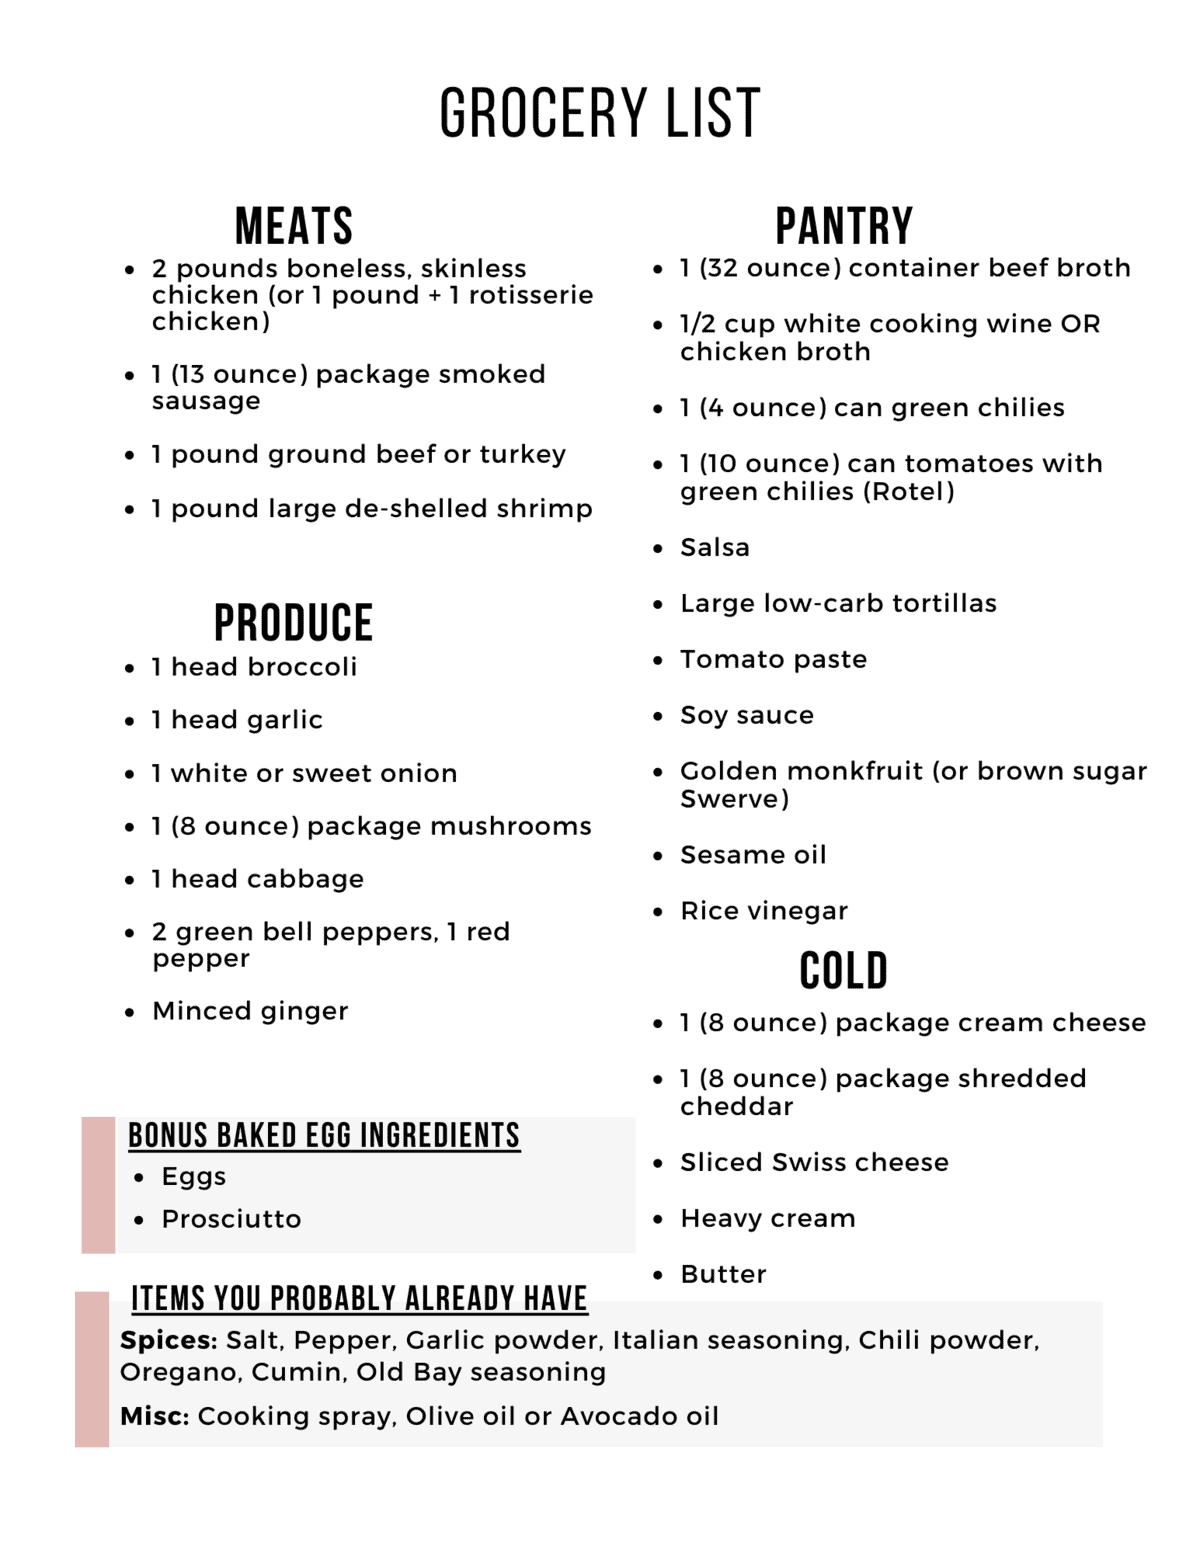 This Easy Keto Grocery List helps you save time and prepare for next week's keto dinners!